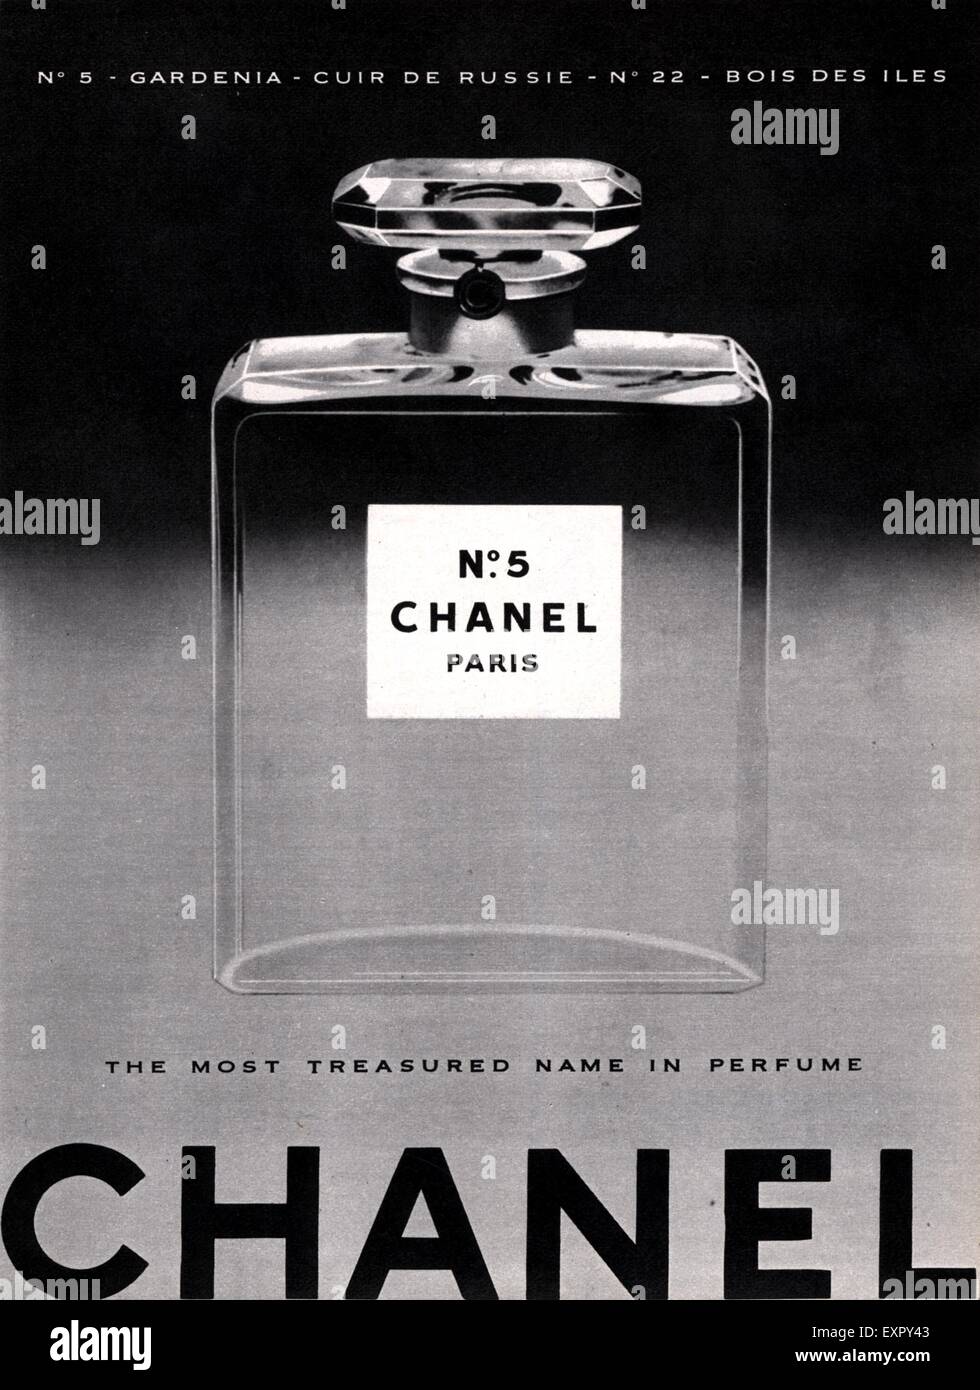 Vintage French Chanel Perfume Advertisement – Laurier Blanc